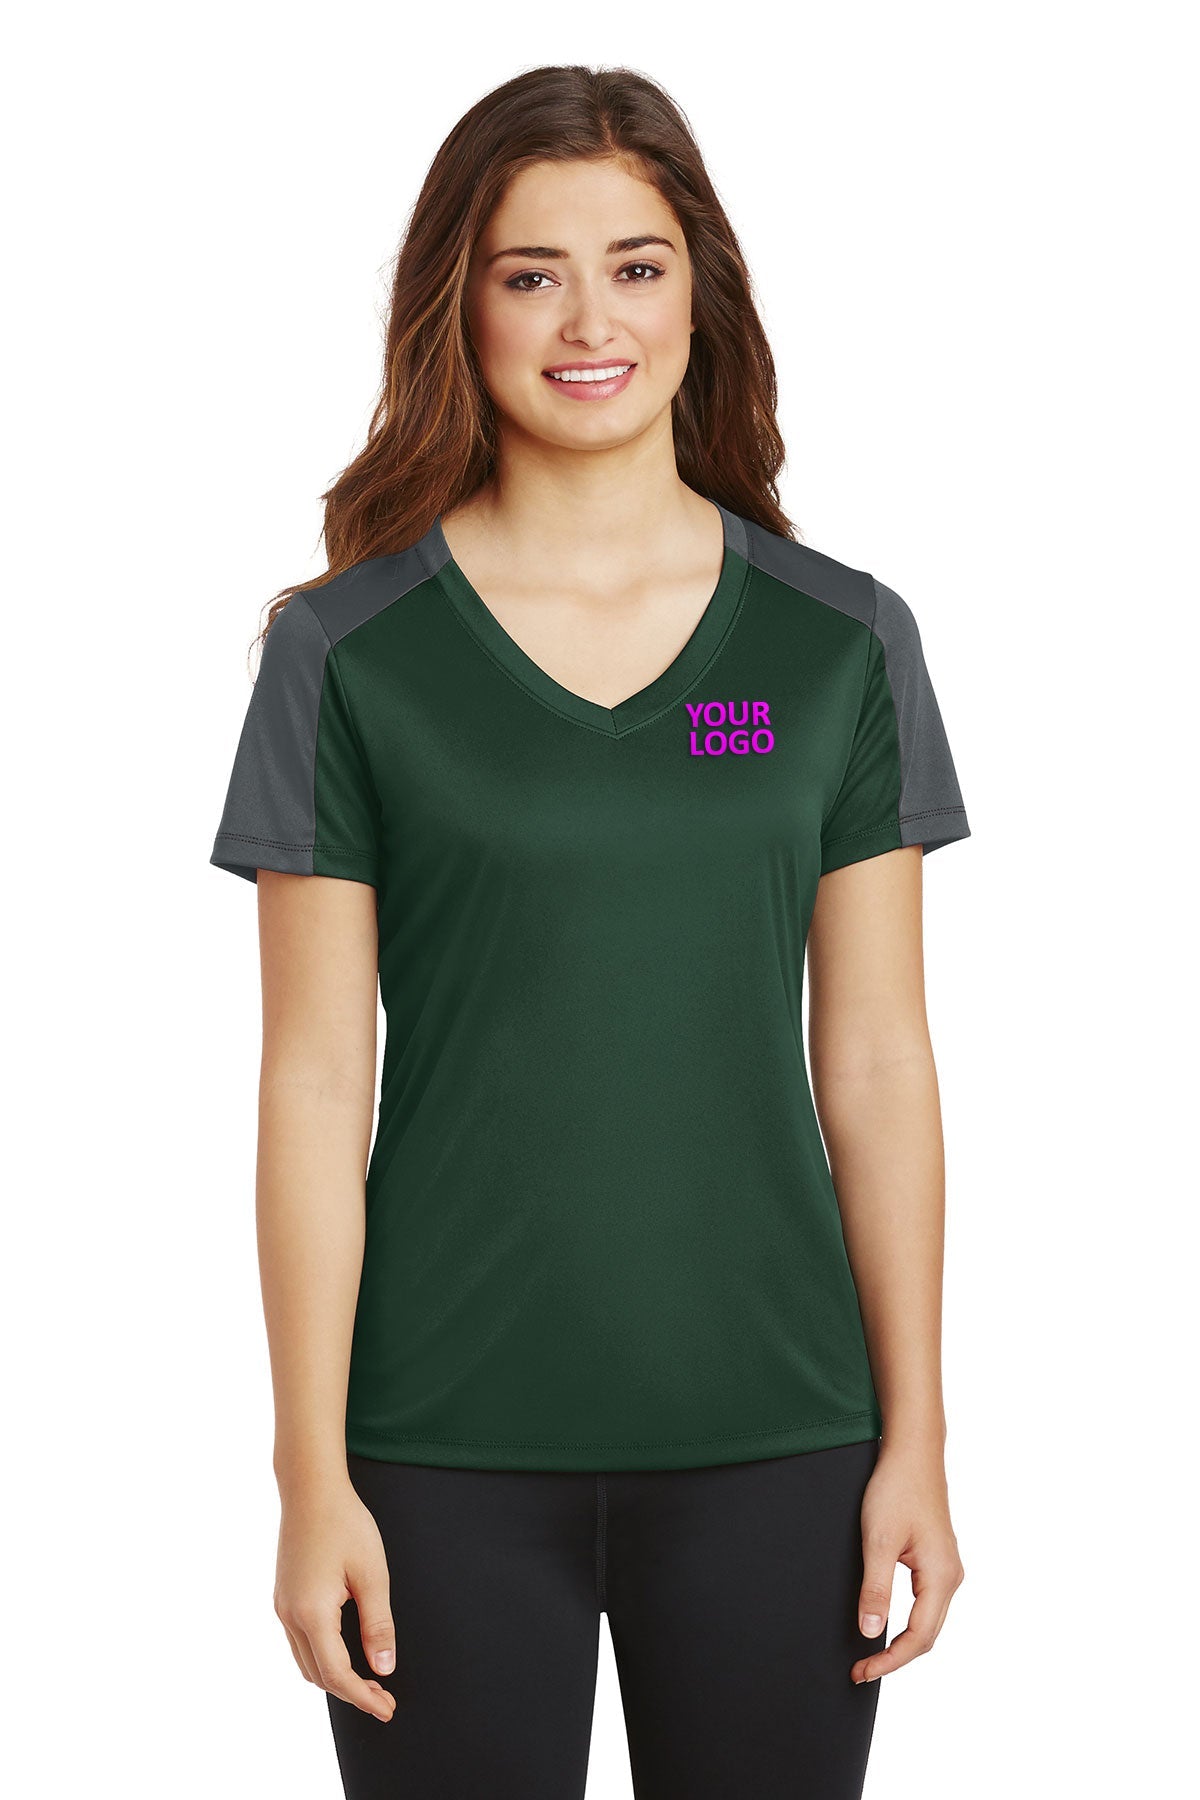 Sport-Tek Ladies PosiCharge Competitor Customized Sleeve-Blocked V-Neck Tee's, Forest Green/ Iron Grey